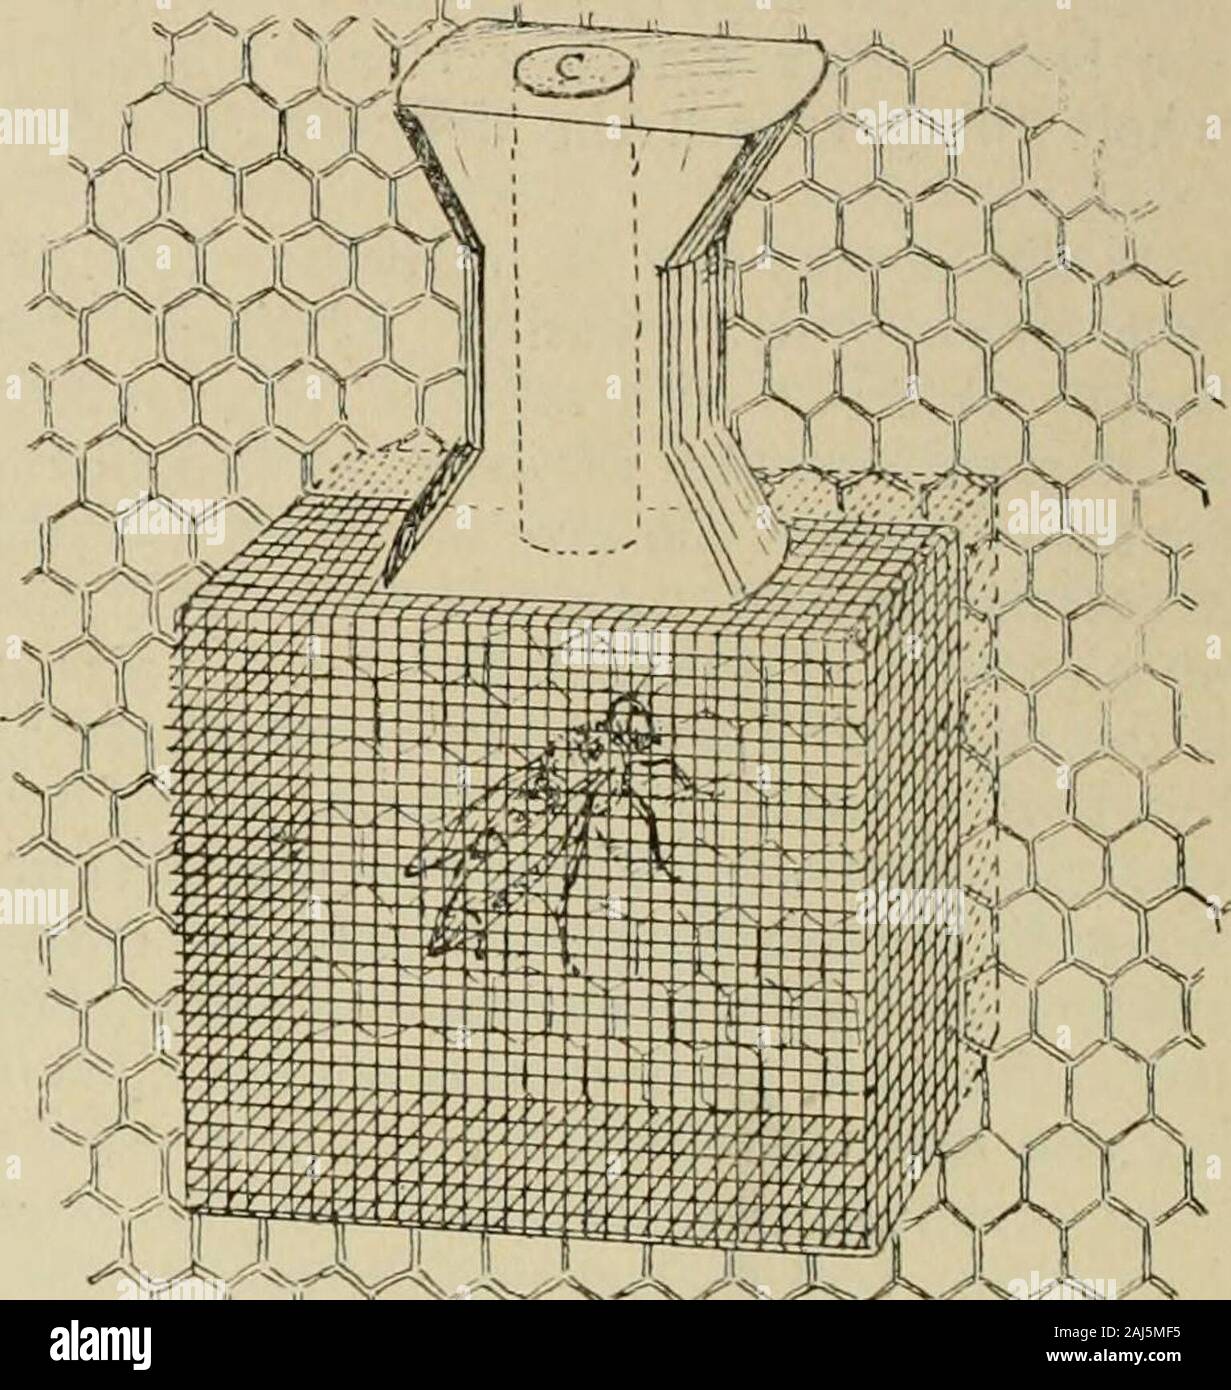 Gleanings in bee culture . age is anfirdiiiary Benton cage with the wood cutclear though in the two circular compart-ments occupied by the bees. The back ofthe cage is provided with a light tin slide.This forms a bottom for the bee compart-ment during shipment. The front of thecage is covered with a piece of screenwire extending down beyond the sides andend of the block half an inch or more.When this ]:avt of the wire is pushed intothe comb, the back or bottom of the cage isbrought in contact with the comb surface.Then after the tin slide has been carefullywithdrawn, the queen finds herself on Stock Photo